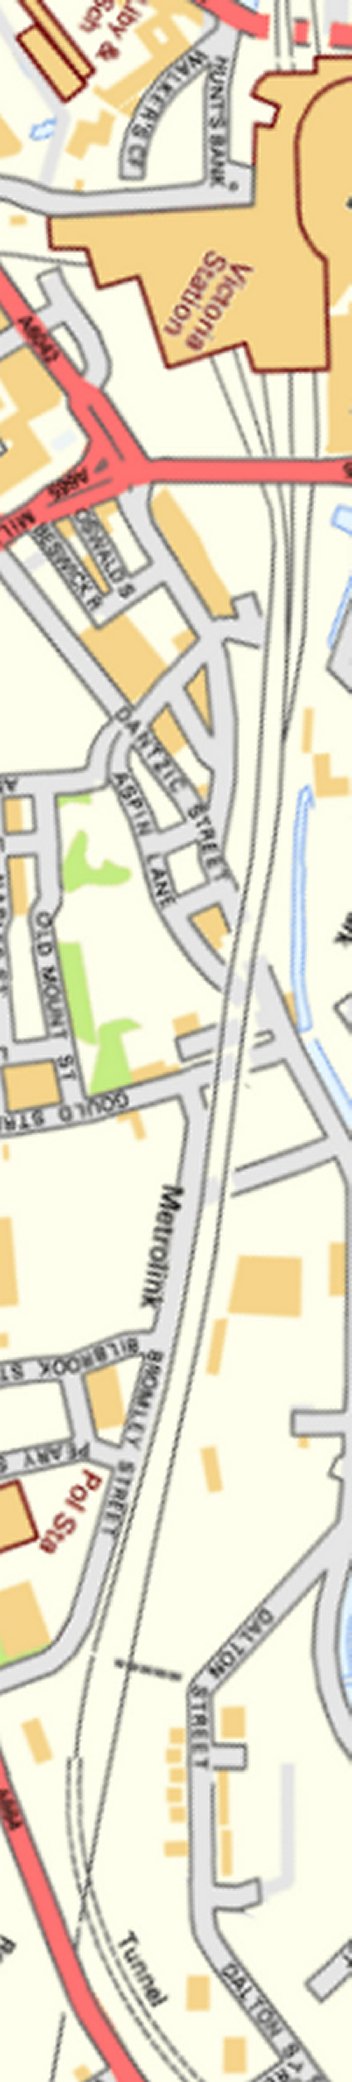 Section from Ordnance Survey OpenSource mapping 2013 showing L&YR railway line from Manchester Victoria to Bromley Street